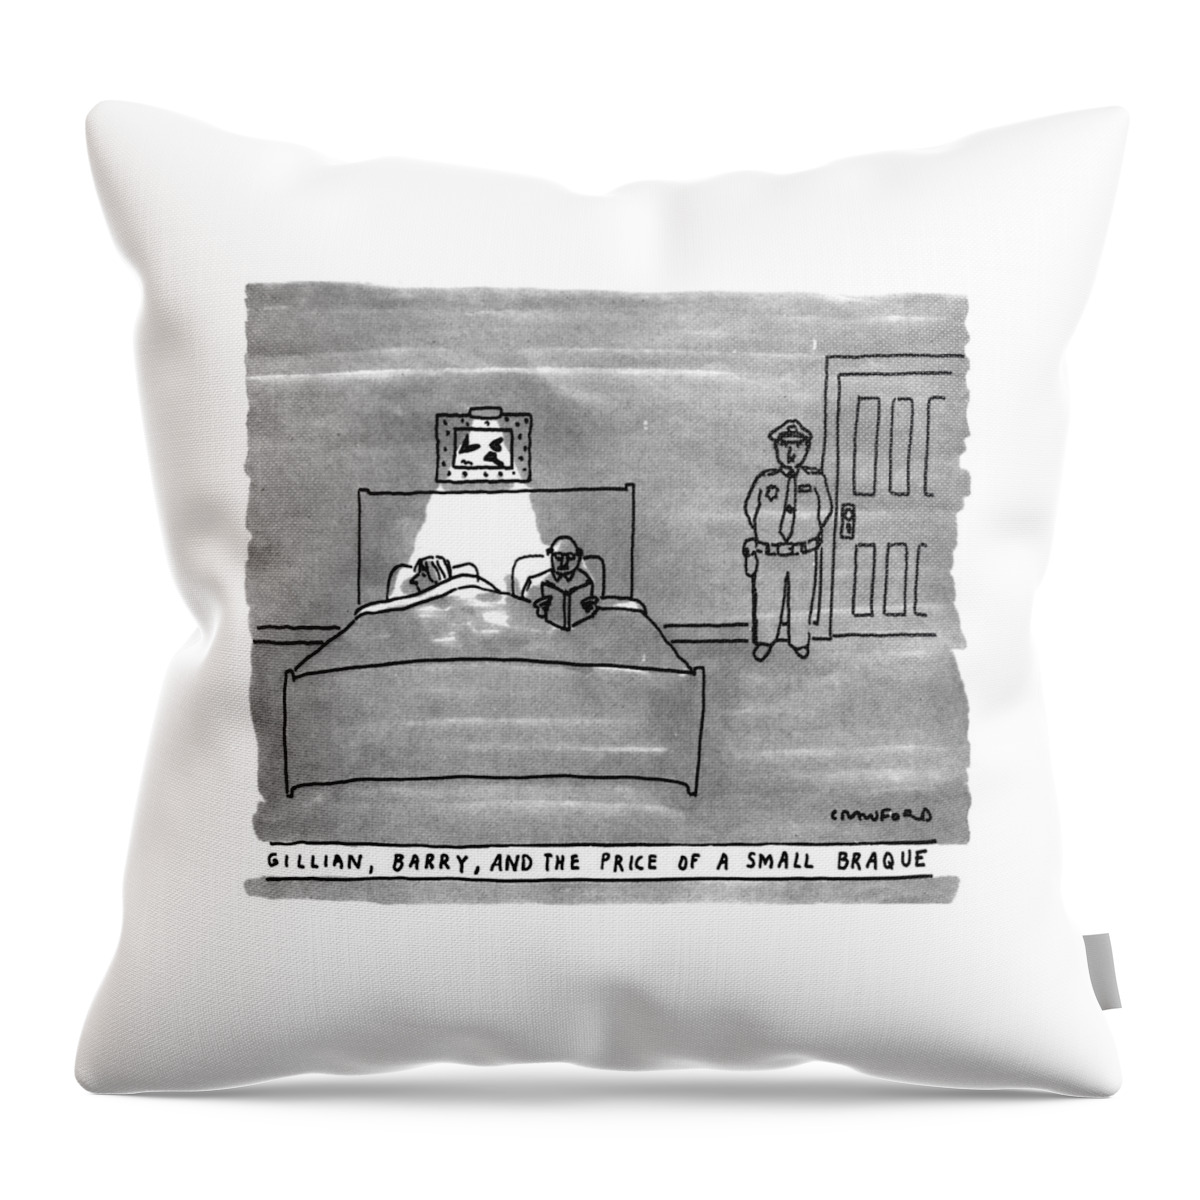 Gillian, Barry, And The Price Of A Small Braque Throw Pillow